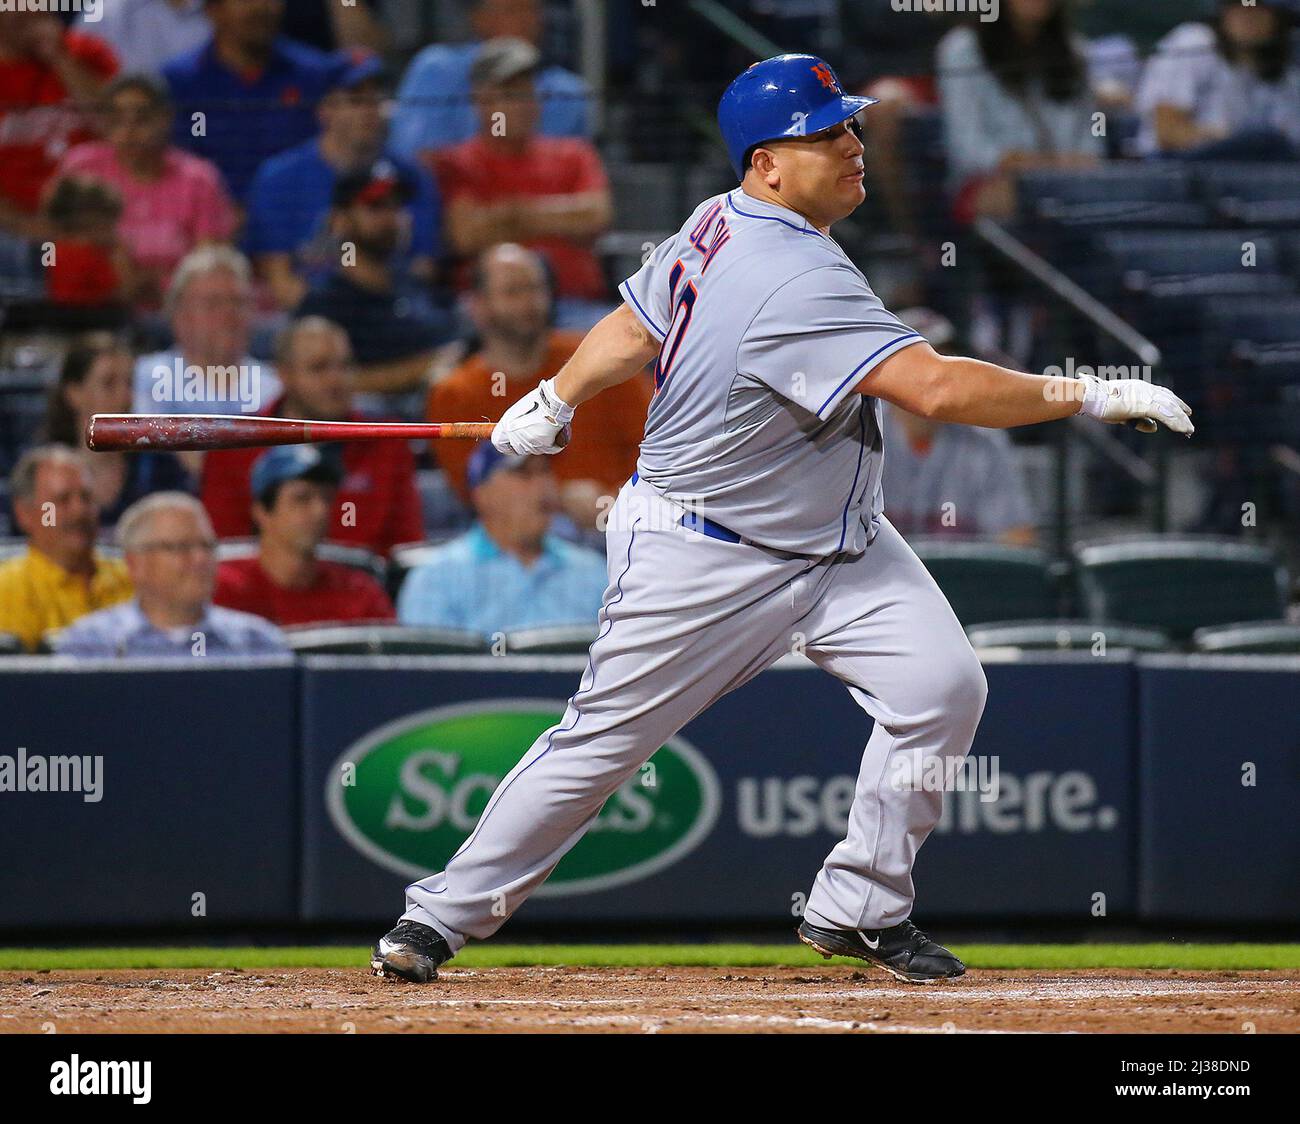 Atlanta, USA. 10th Sep, 2015. The New York Mets' Bartolo Colon hits an RBI single against the Atlanta Braves during the fourth inning on Thursday, Sept. 10, 2015, at Turner Field in Atlanta. (Photo by Curtis Compton/Atlanta Journal-Constitution/TNS/Sipa USA) Credit: Sipa USA/Alamy Live News Stock Photo